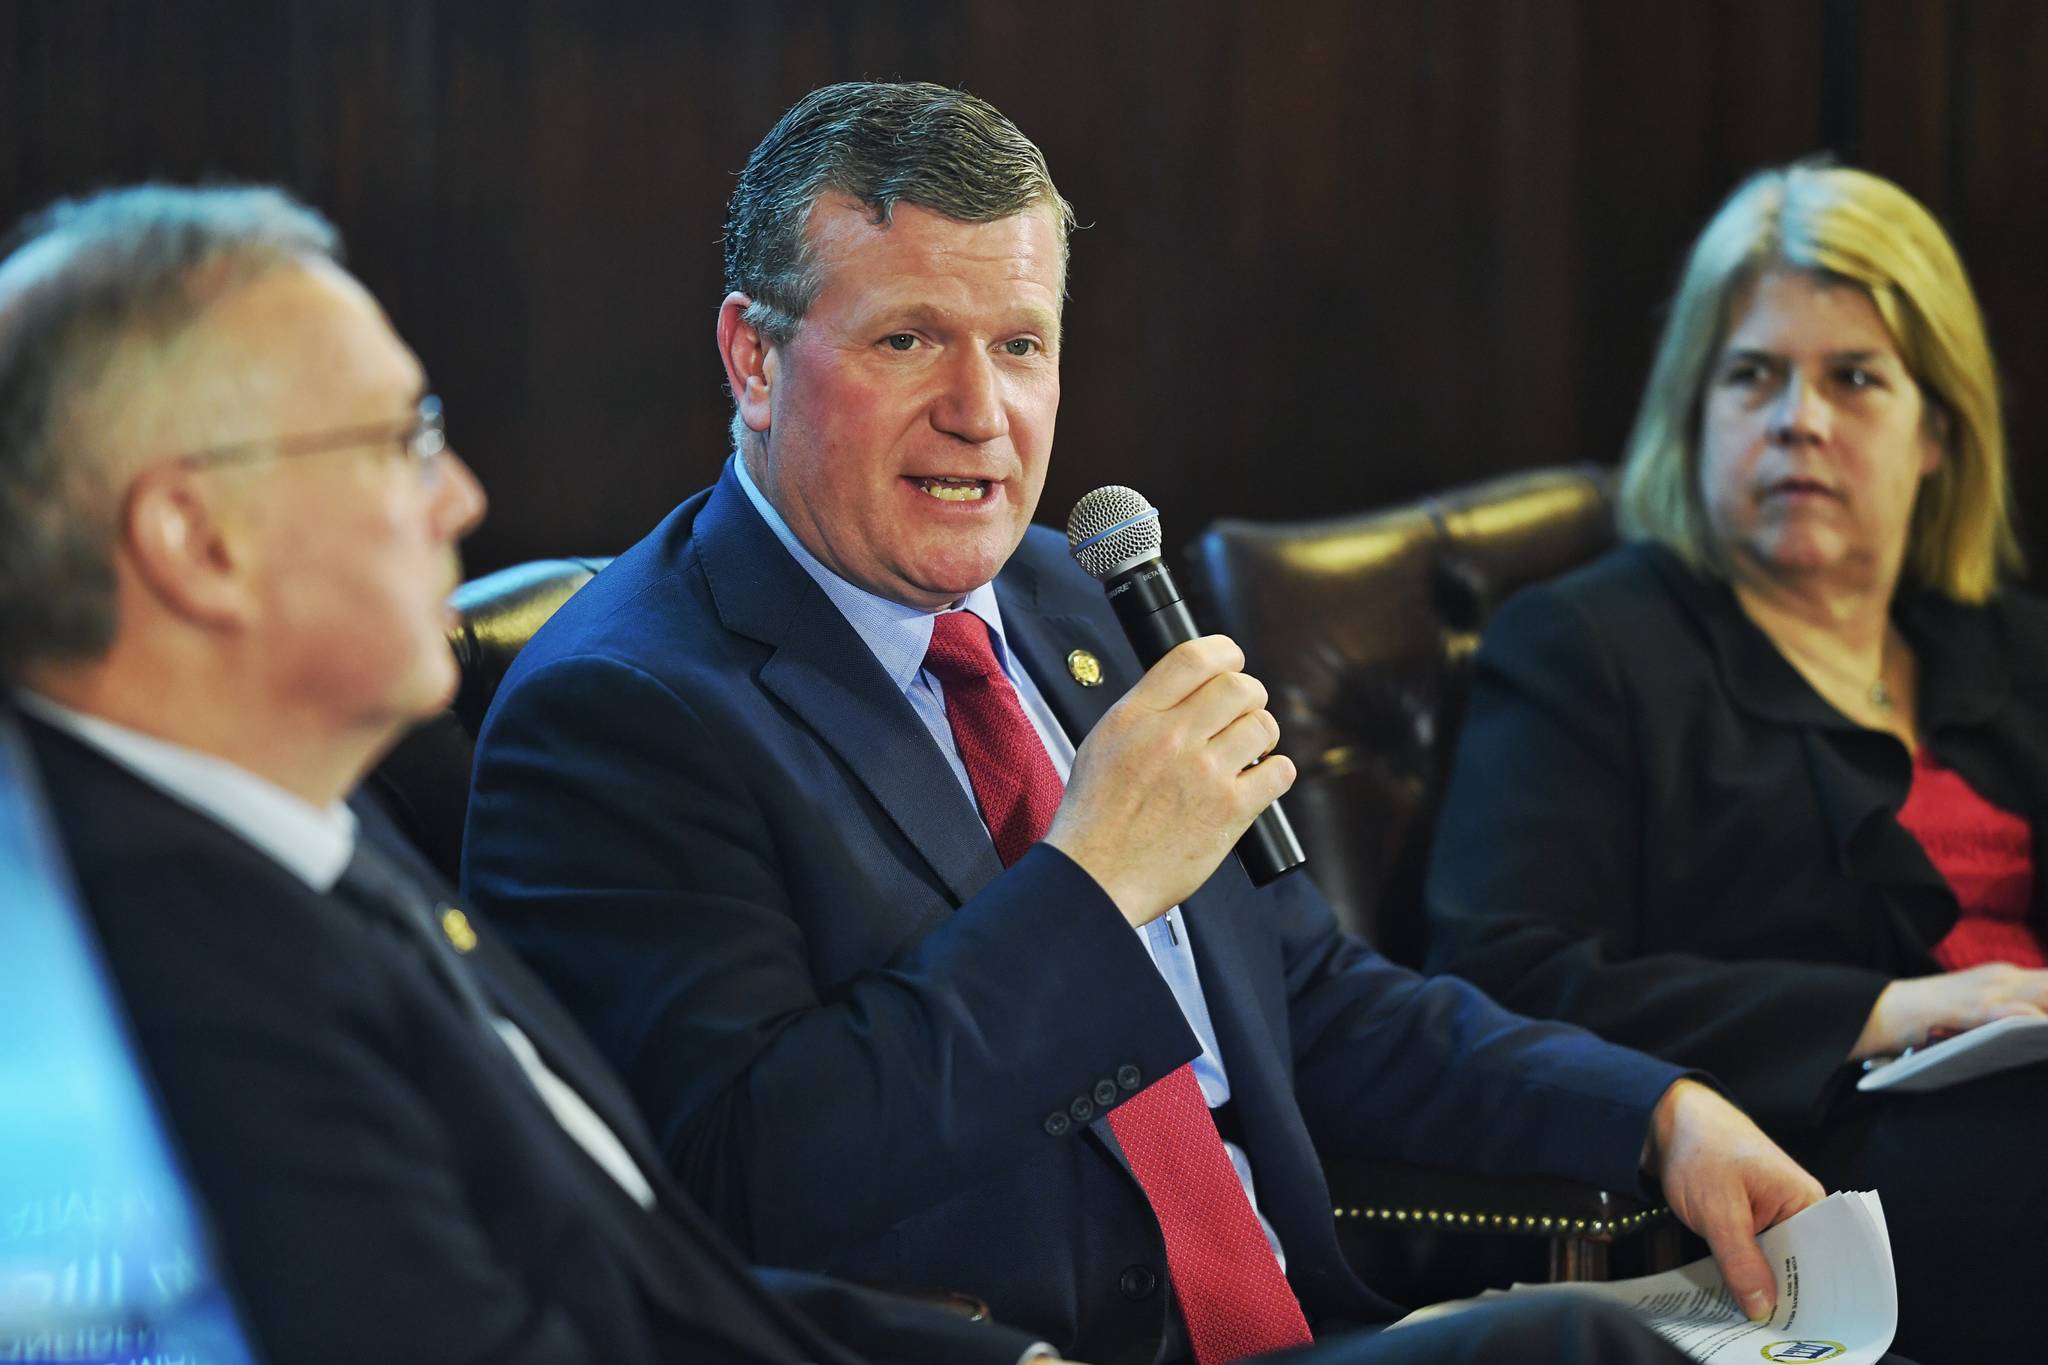 Rep. Chuck Kopp, R-Anchorage, center, speaks about the House passing a crime bill during a press conference with Speaker of the House Bryce Edgmon, D-Dillingham, left, and Rep. Tammie Wilson, R-North Pole, at the Capitol on Wednesday, May 8, 2019. (Michael Penn | Juneau Empire)